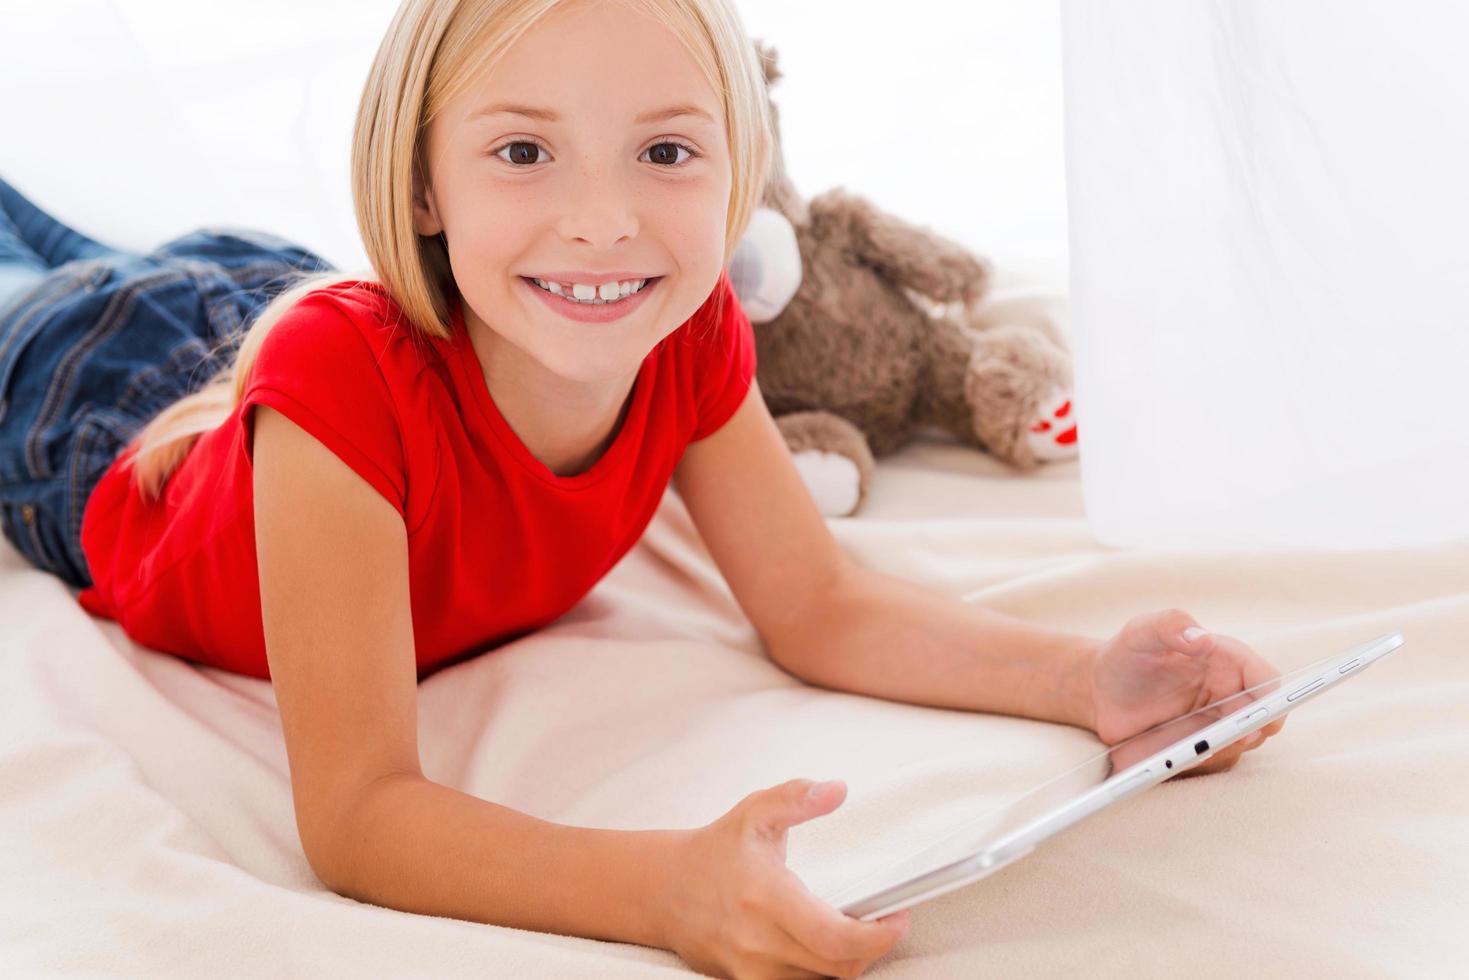 Technologies become easier. Cute little girl holding digital tablet and smiling while lying in bed photo